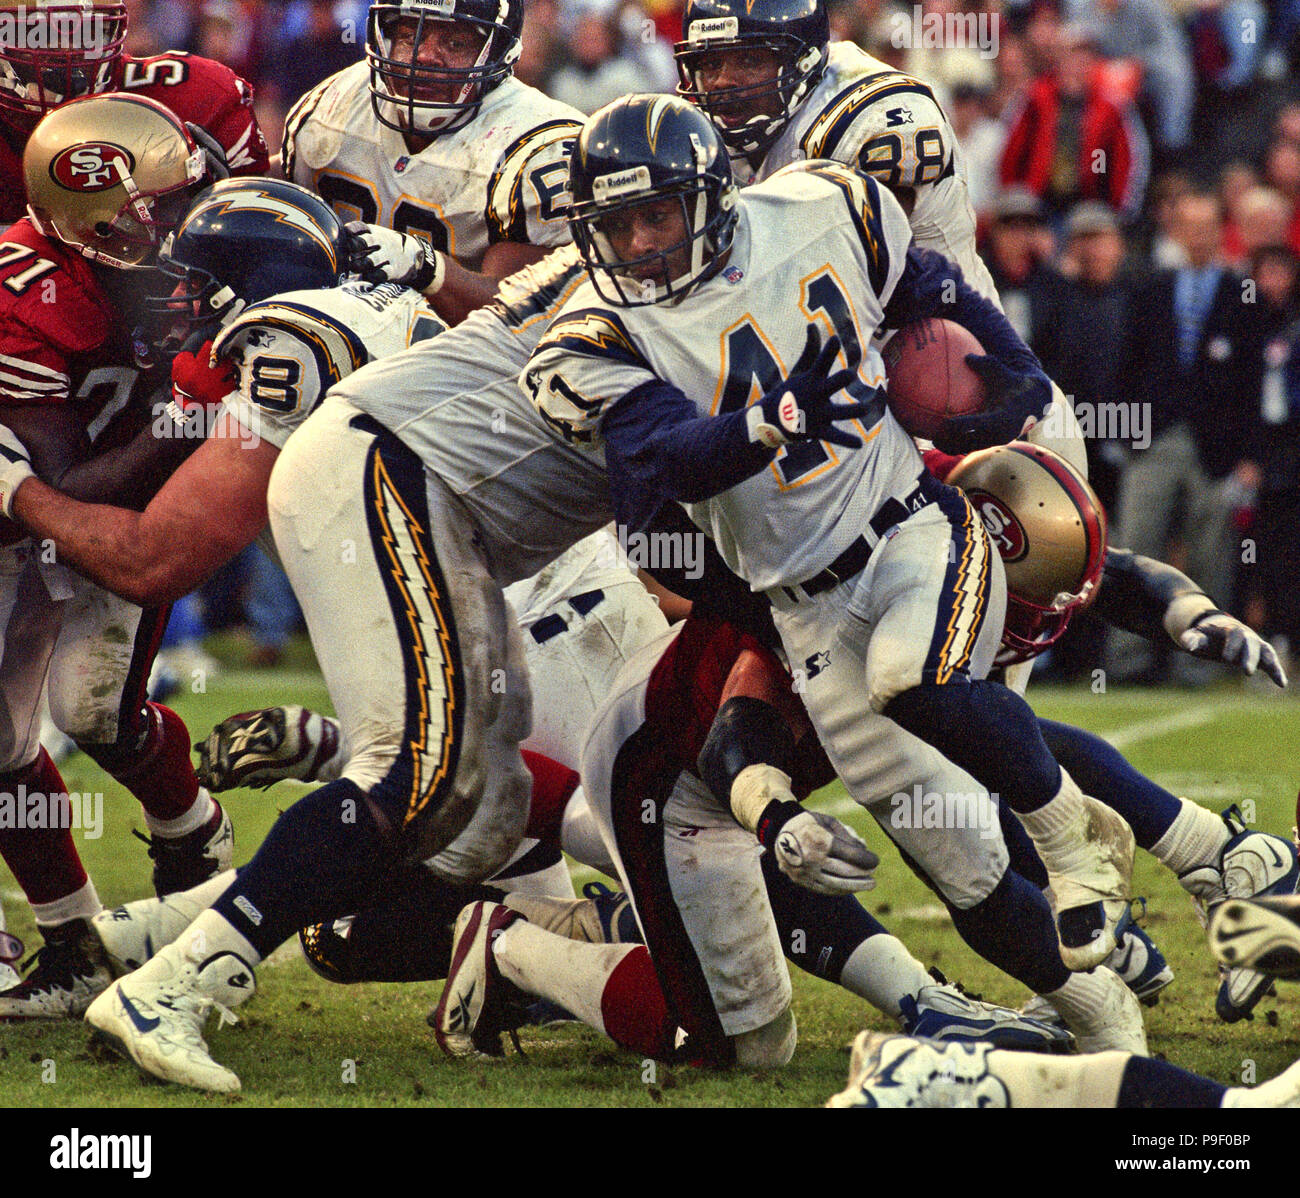 niners vs chargers